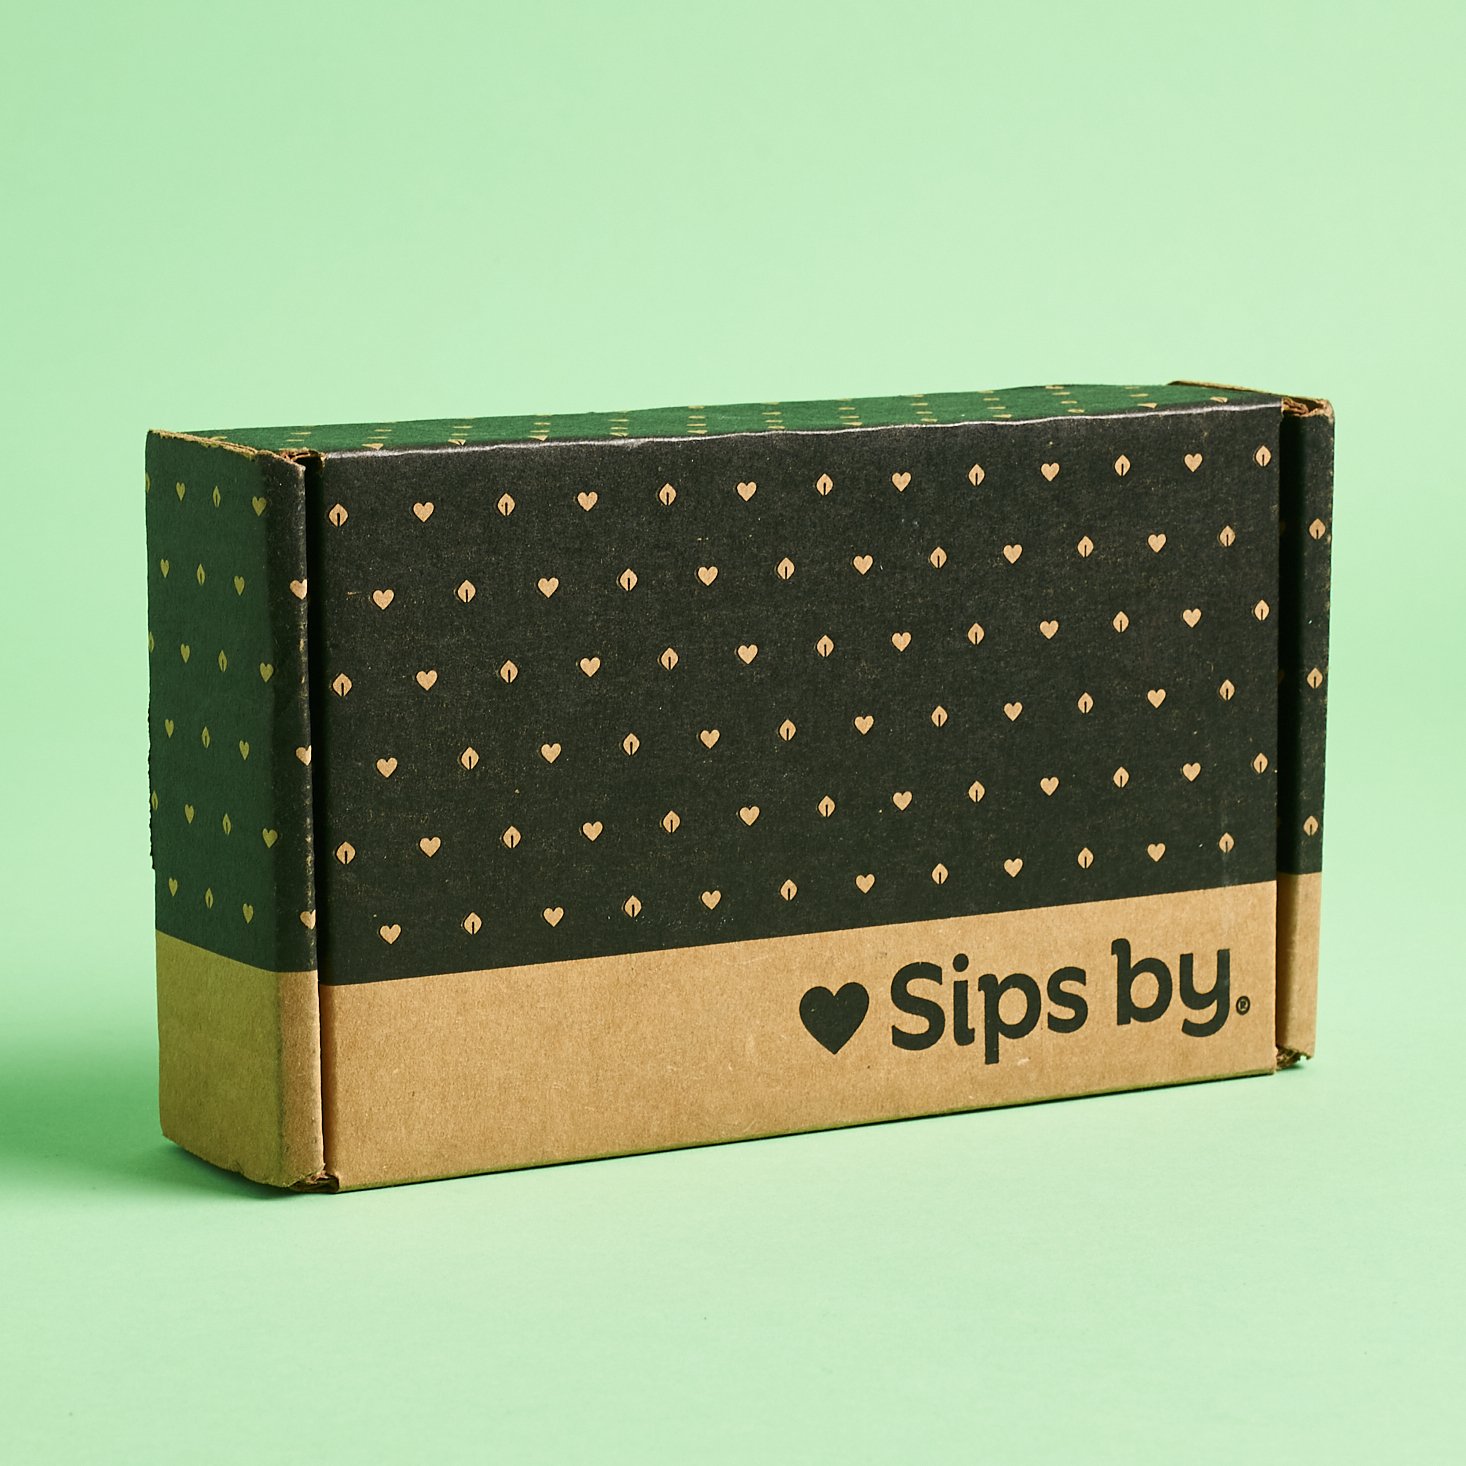 Sips by 2021 Mother’s Day Limited Edition Tea Boxes  – Available Now